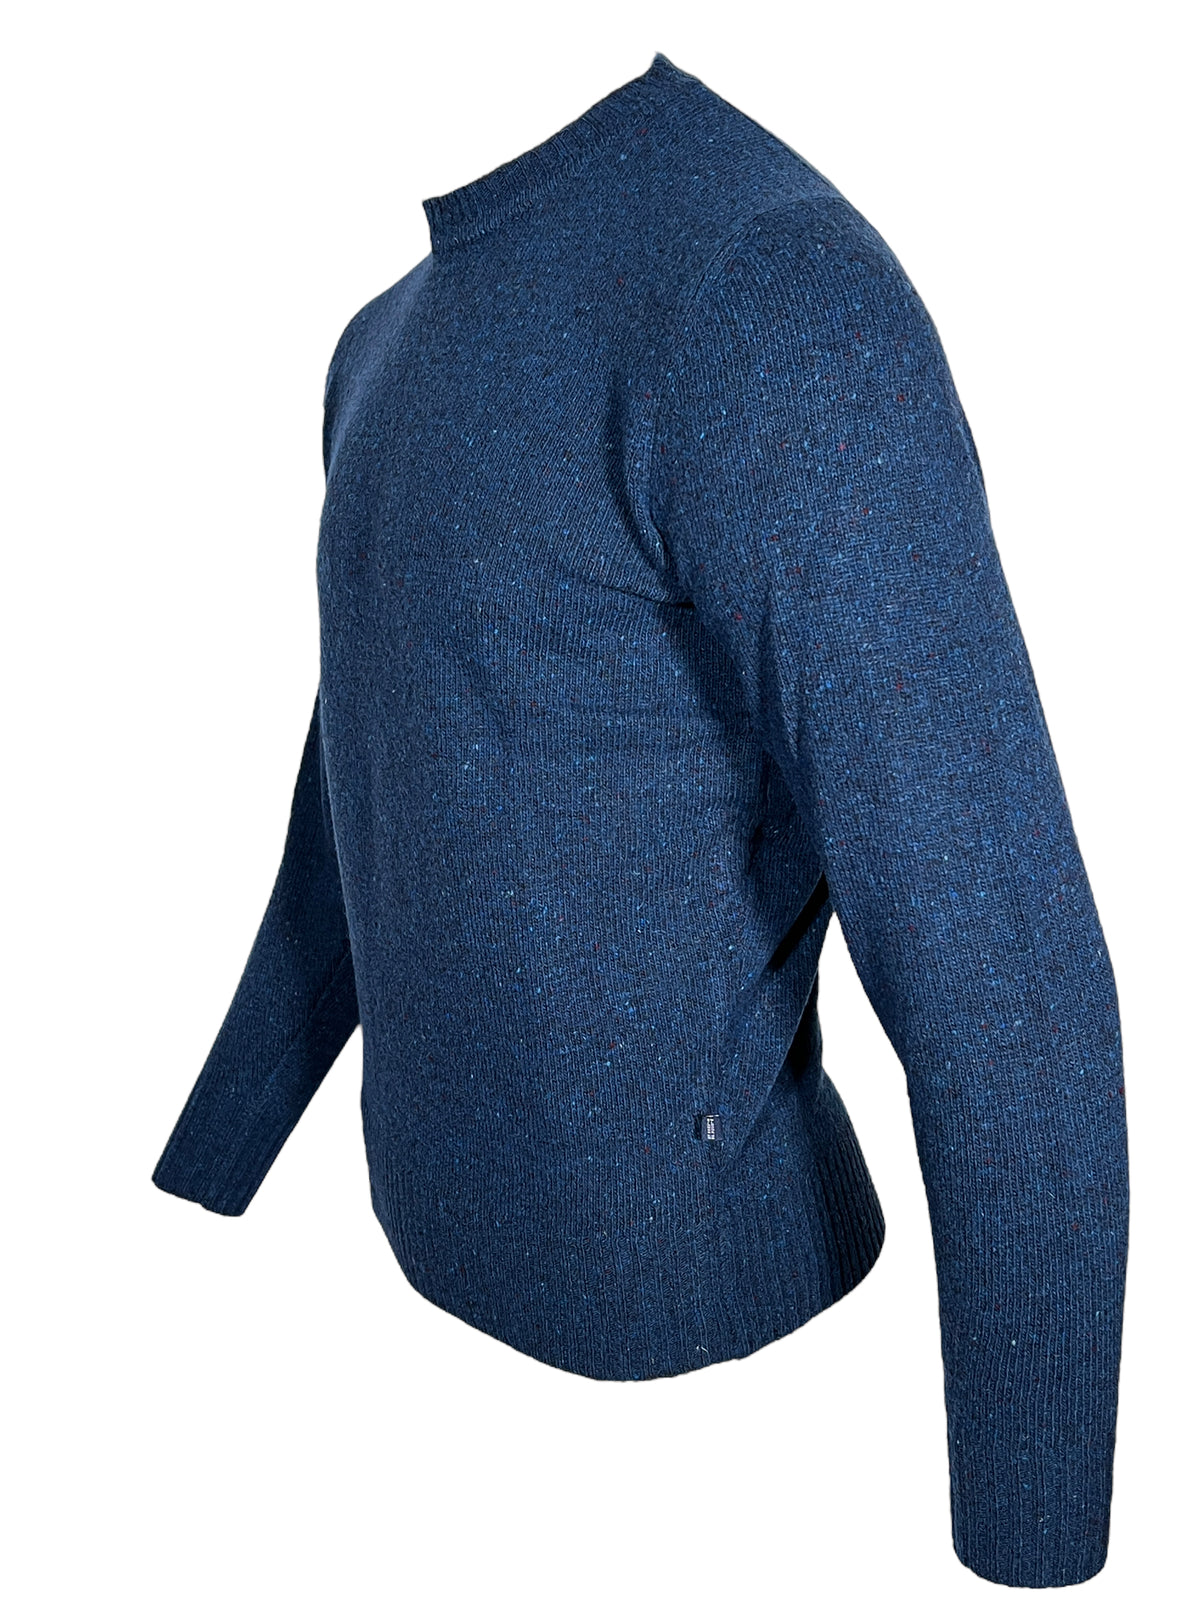 ALAN PAINE LUXURY DONEGAL CREW SWEATER - BROE